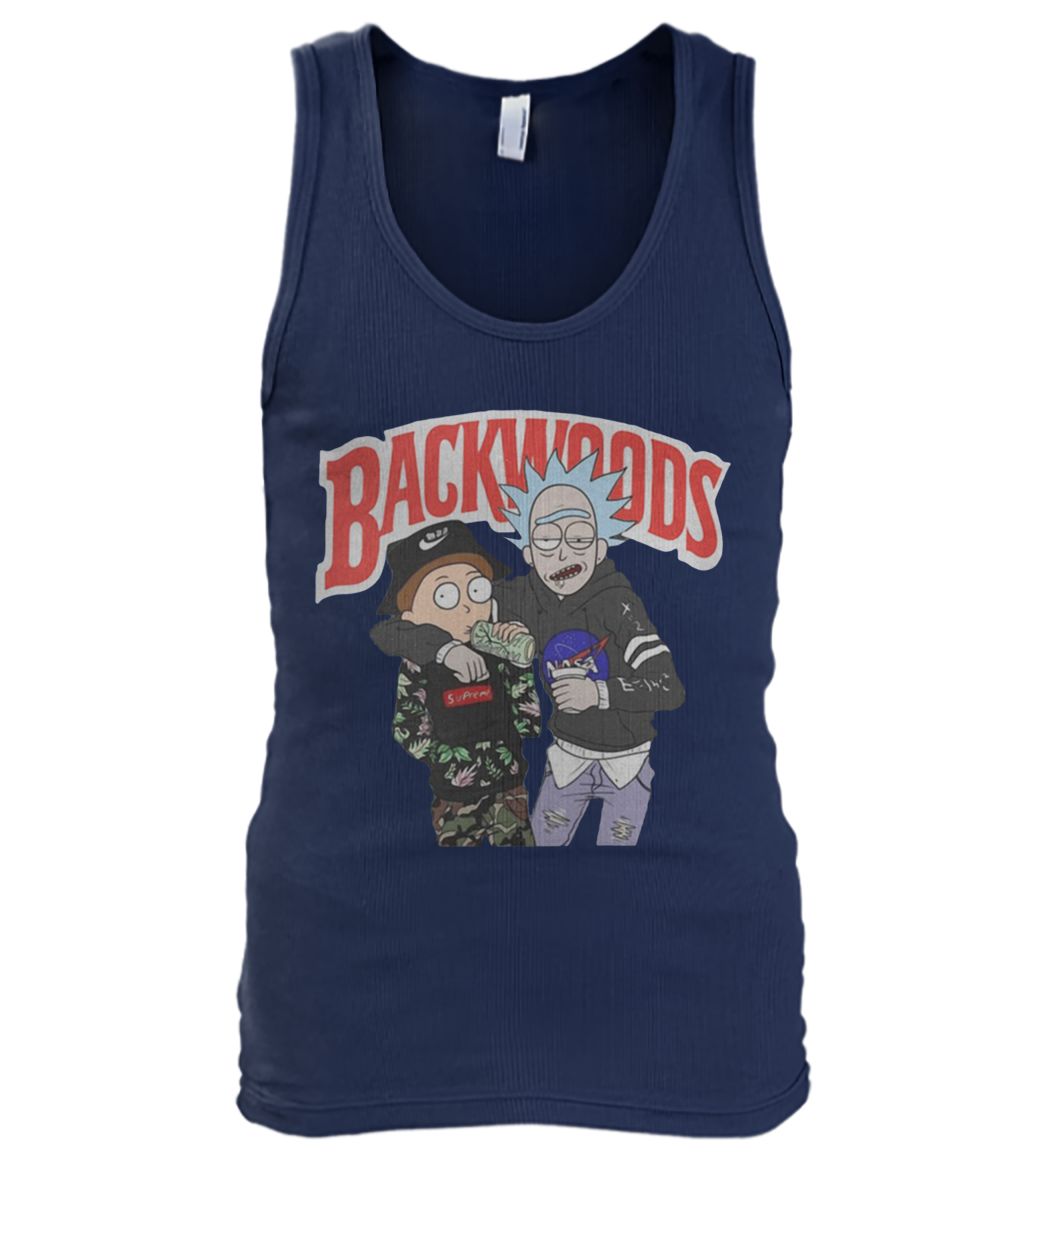 Rick and morty backwoods men's tank top